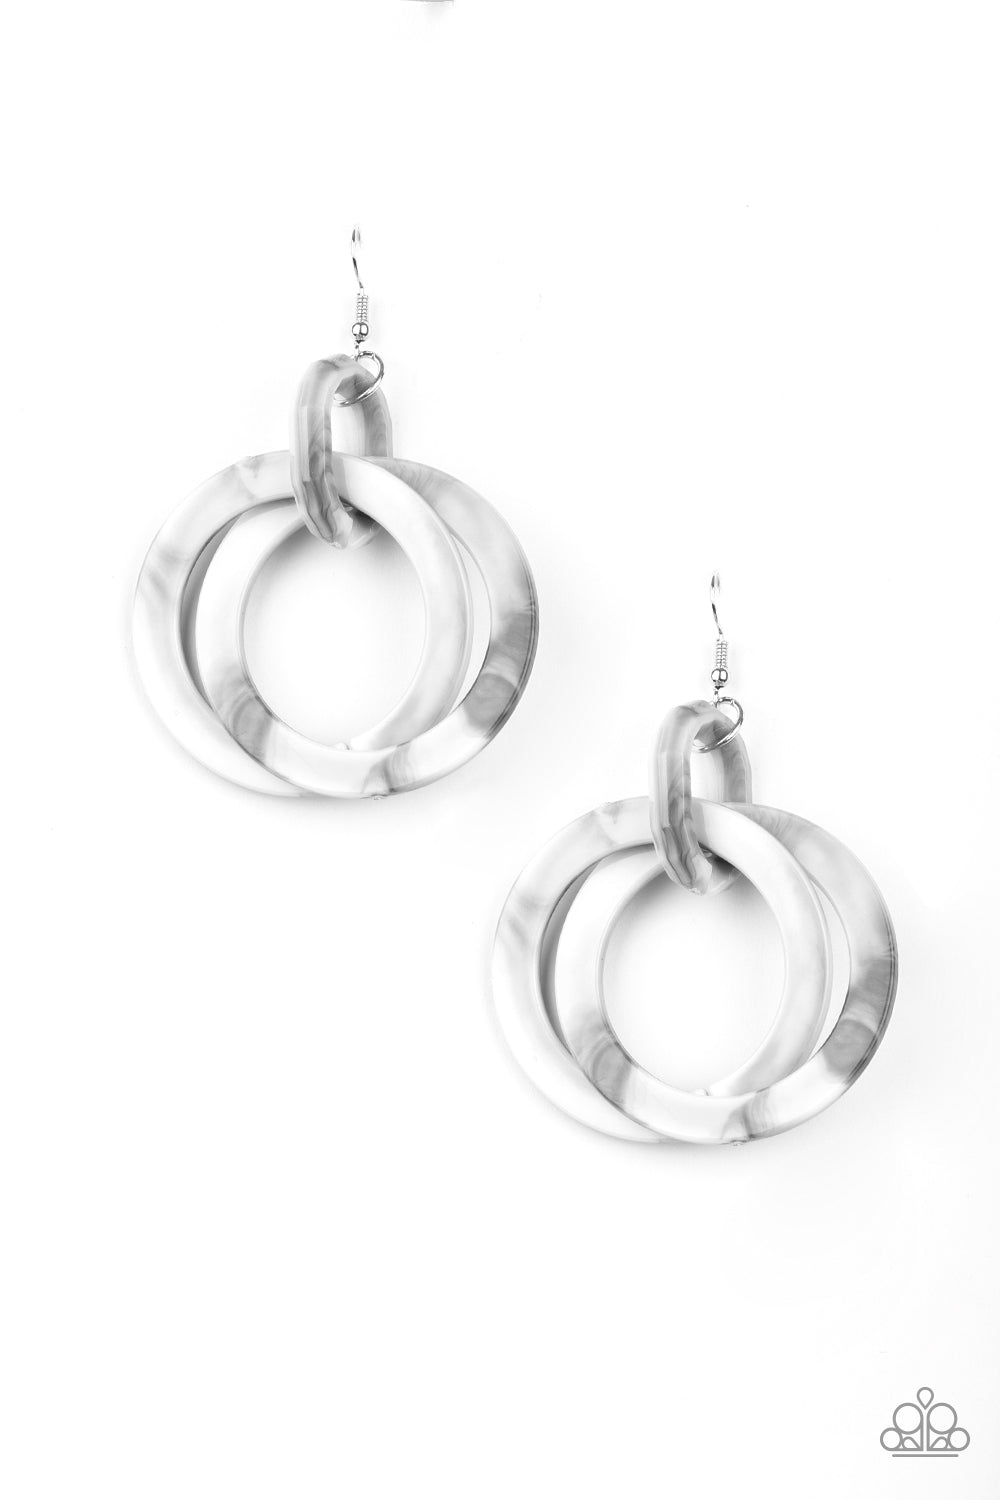 RETRO RIVIERA - SILVER GRAY WHITE MARBLED DOUBLE HOOP ACRYLIC EARRINGS